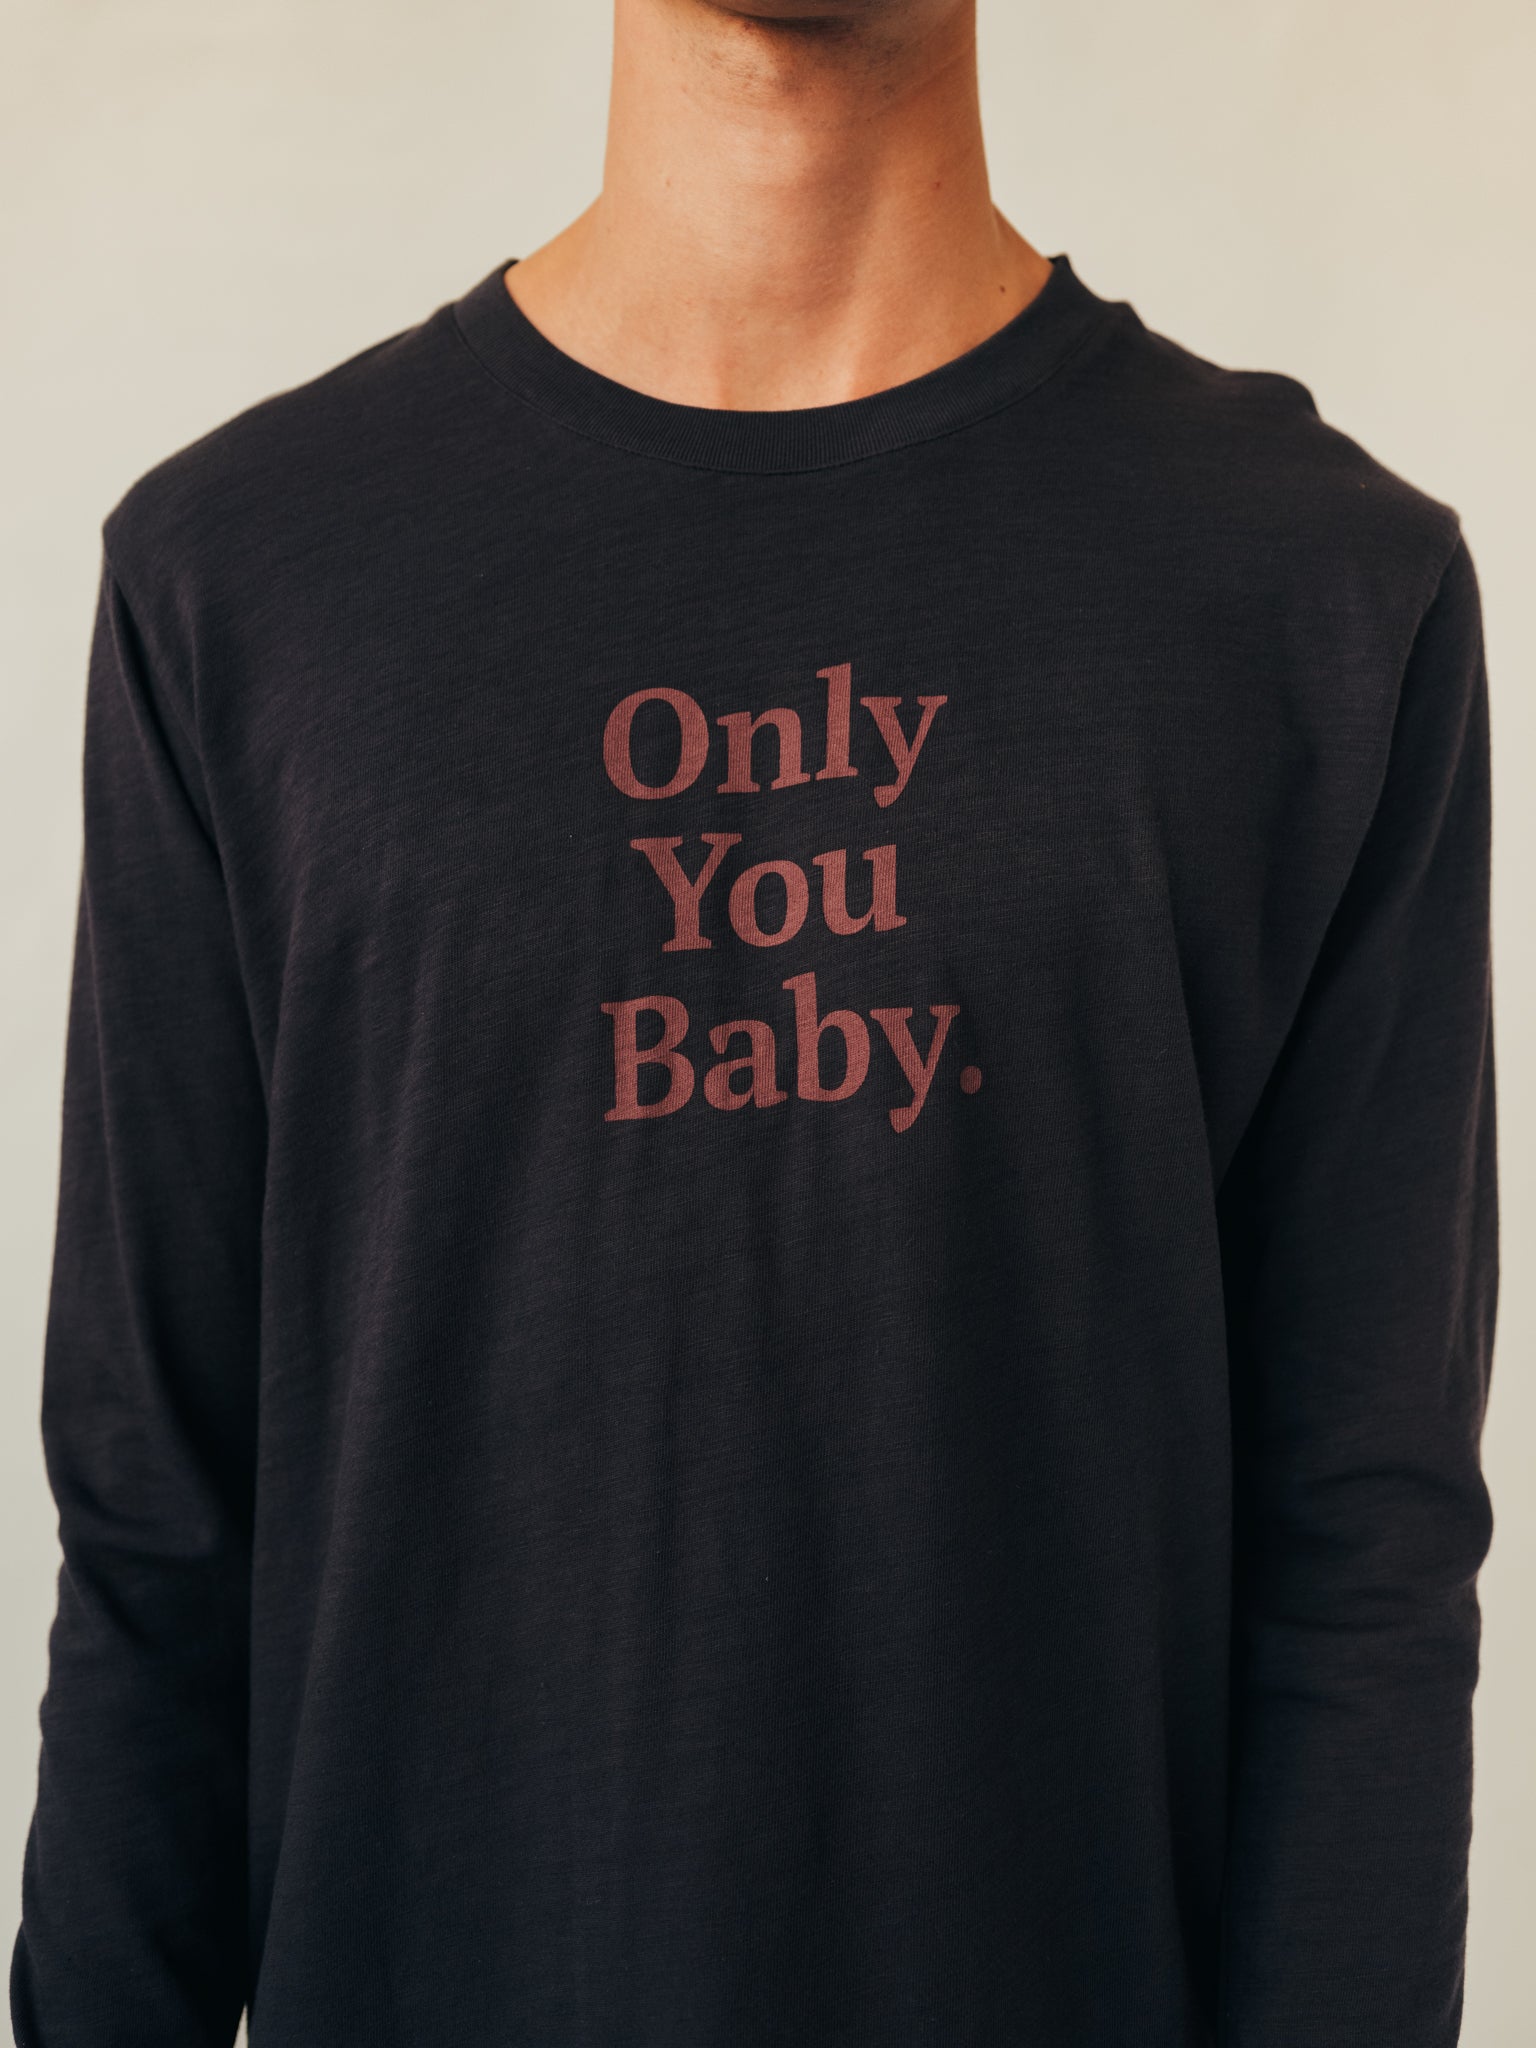 LONG SLEEVE GRAPHIC ONLY YOU BABY CHARCOAL & AUBERGINE